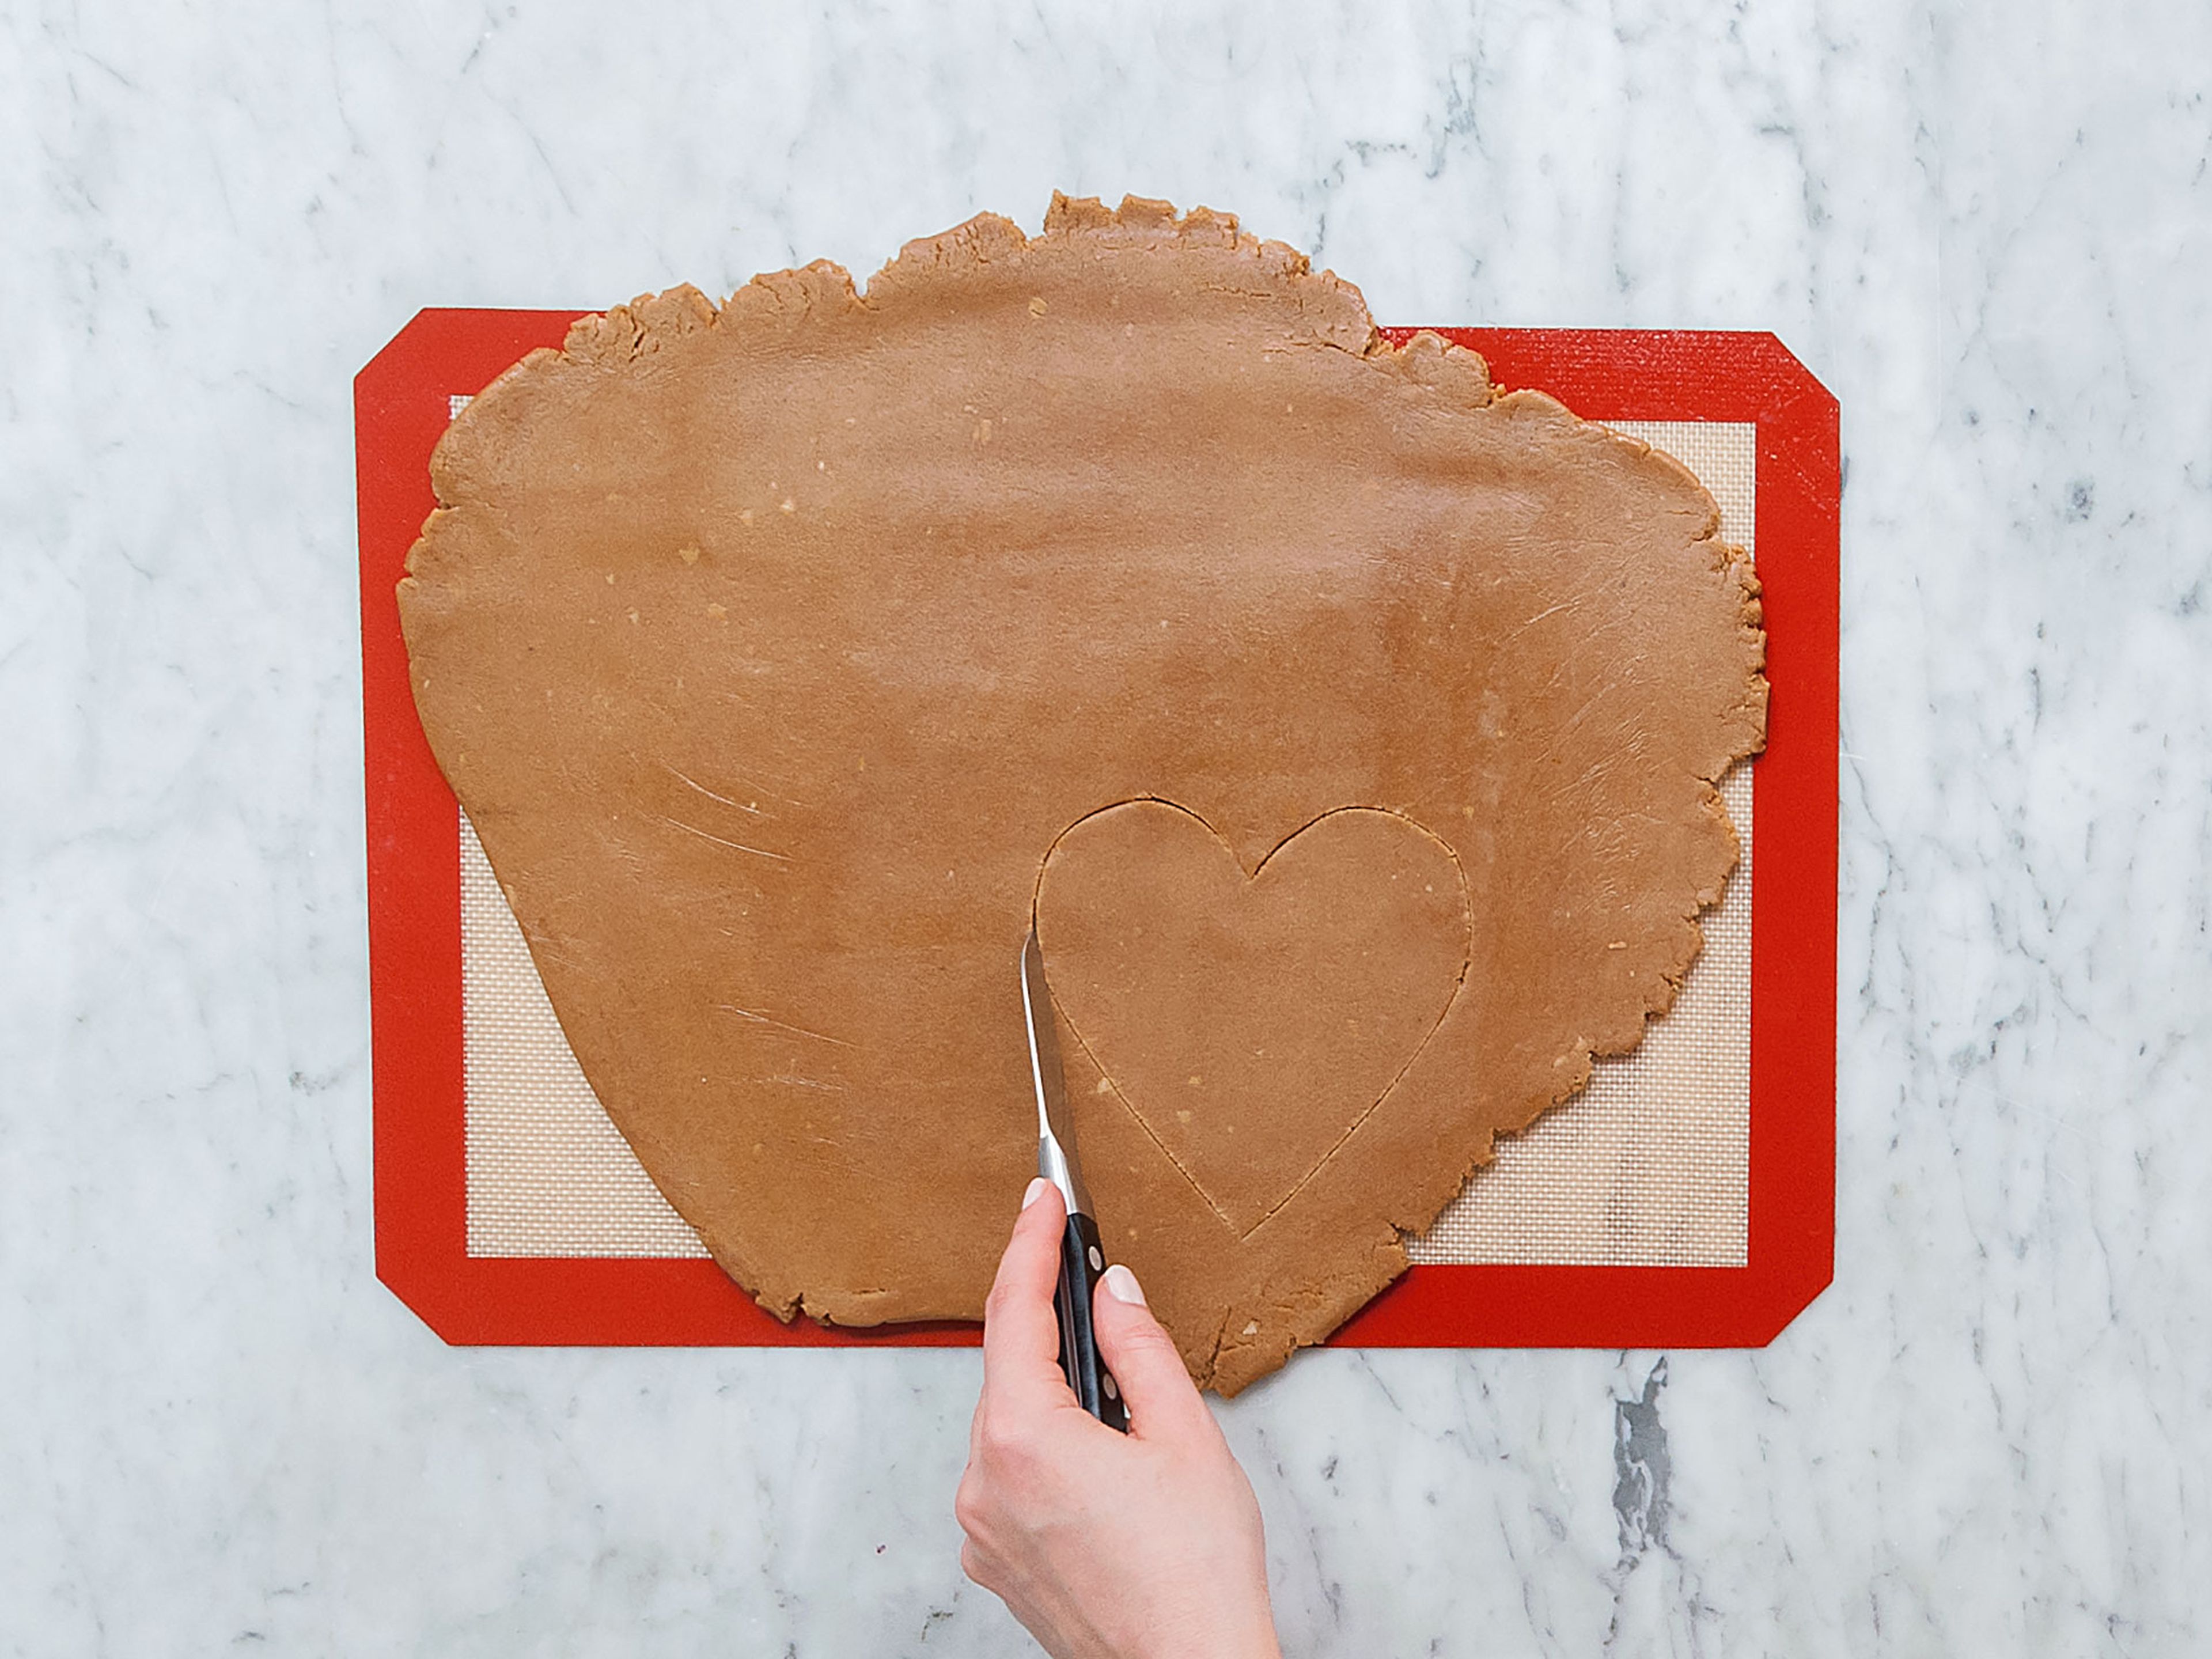 Preheat oven to 200°C/390°F. Roll out dough on a silicone baking mat or in between two sheets of plastic wrap. It should be 1-cm/0.4-in thick. Cut out ten heart-shaped forms and transfer them onto two parchment-lined baking sheets. Bake in the oven for approx. 12 – 15 min. Remove from oven and transfer onto a neutral underground when still warm. Let cool down completely.